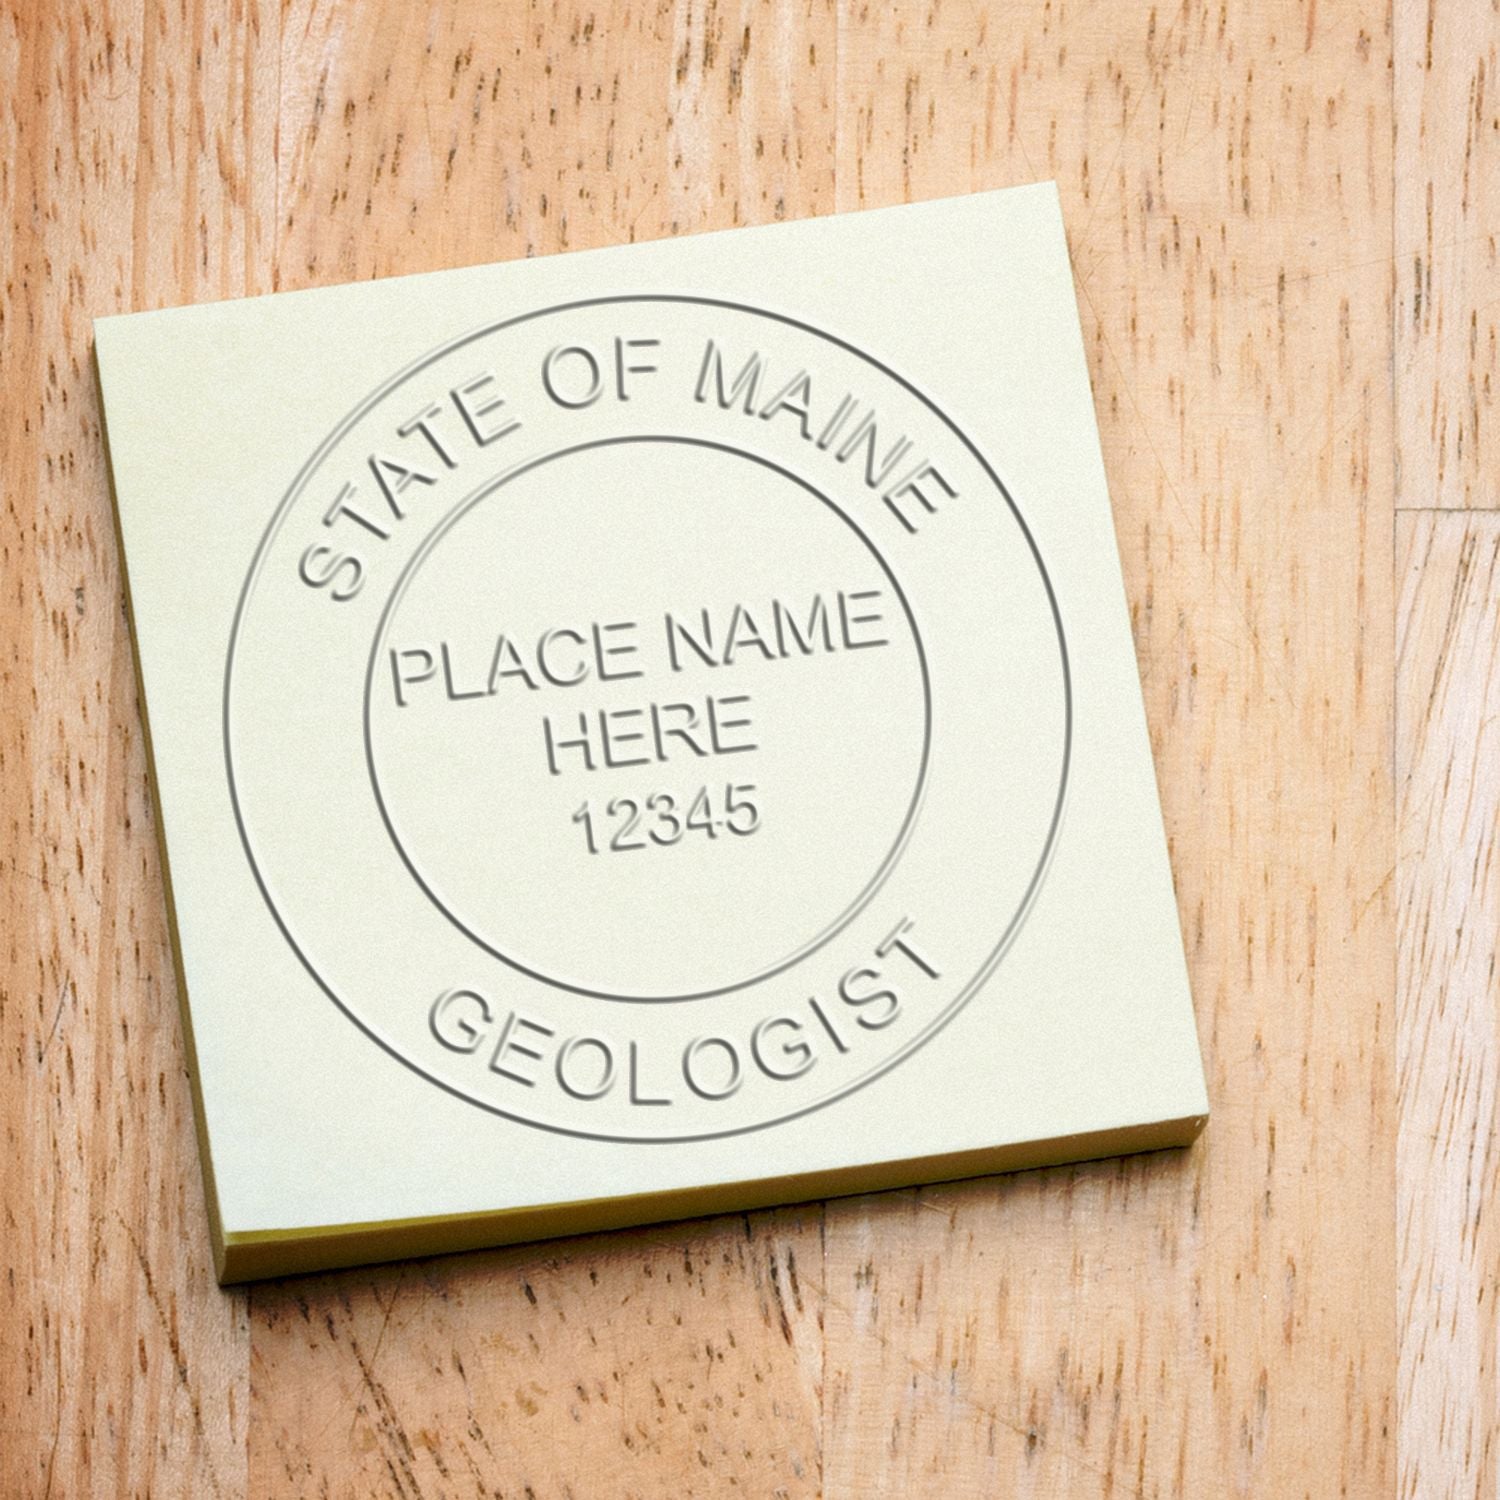 The main image for the Heavy Duty Cast Iron Maine Geologist Seal Embosser depicting a sample of the imprint and imprint sample